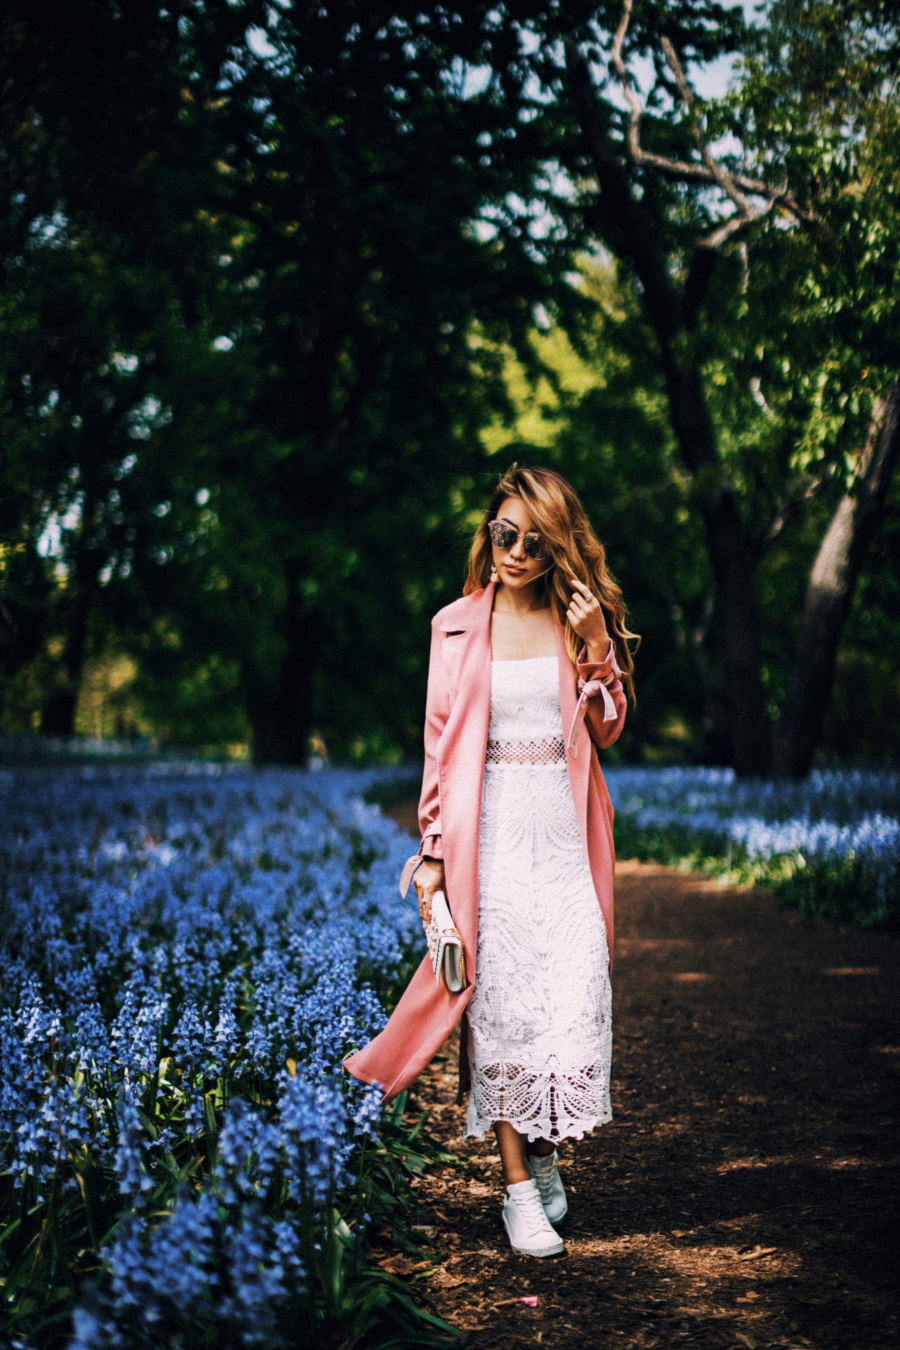 River Island Pink Trench White Dress - 9 Fresh Ways To Style Your Favorite Trench Coat For Any Occasion This Spring // NotJessFashion.com